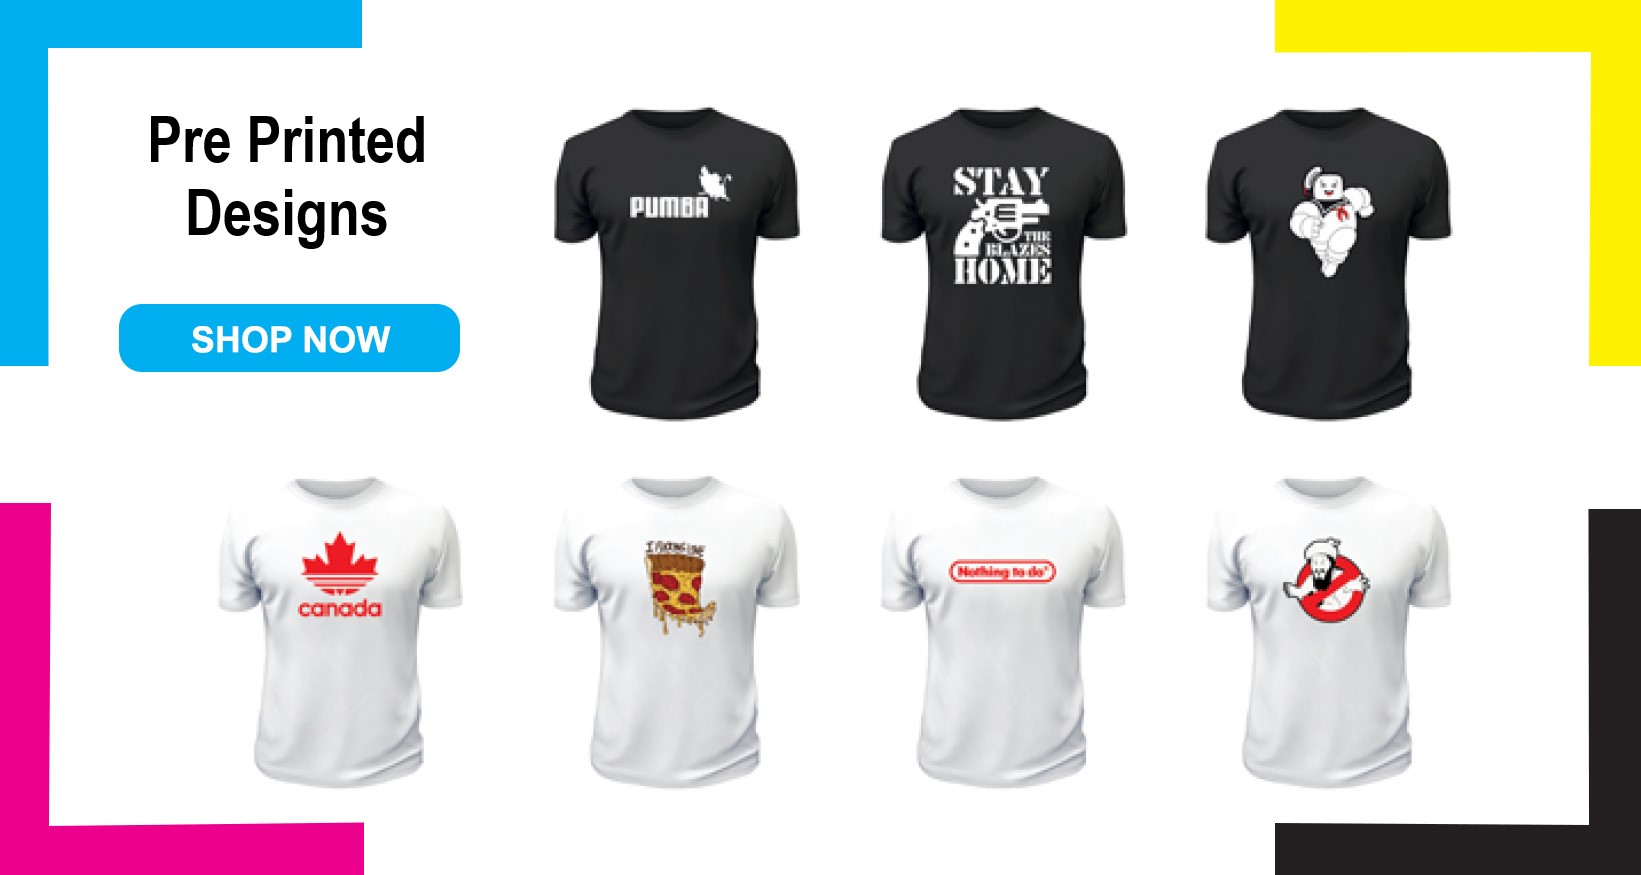 Banner for Printwell Canada's pre-printed t-shirt designs in stock now. Top row shows 3 custom graphic black t-shirts and bottom row shows 4 white custom graphic t-shirts.